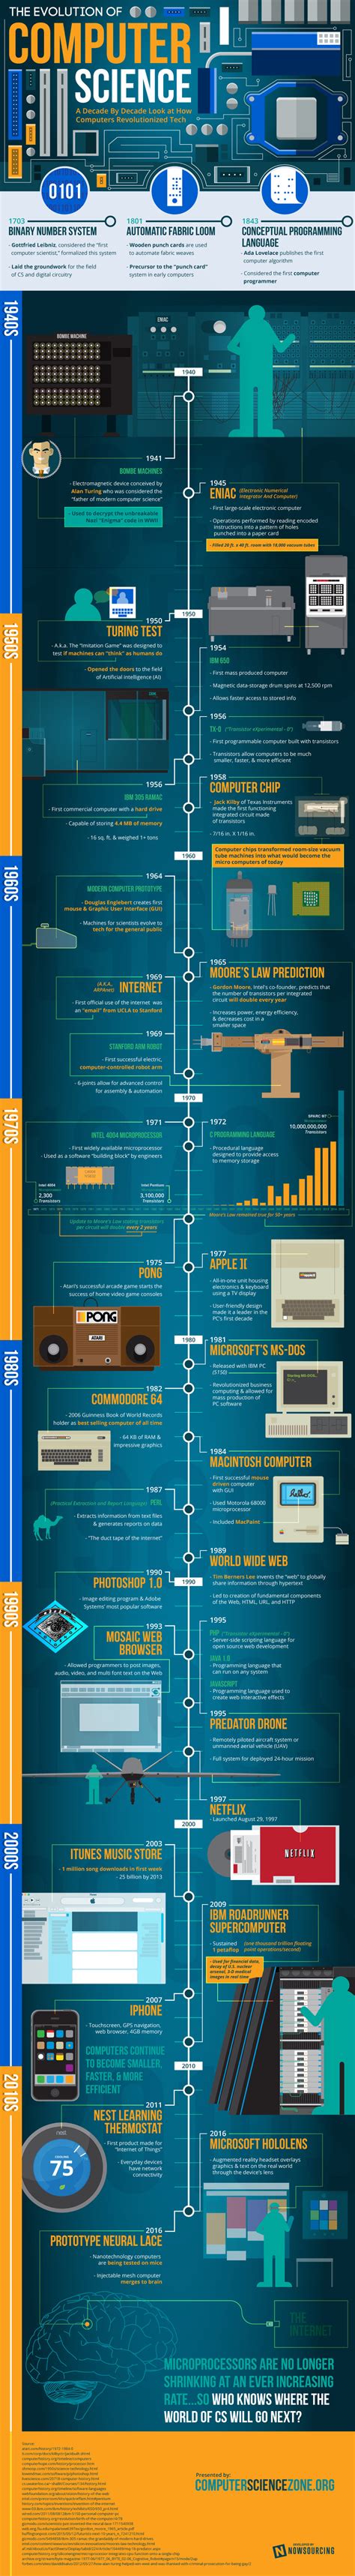 Pdf | history of information technology is incredible!!! ITGS classroom displays - ITGS News